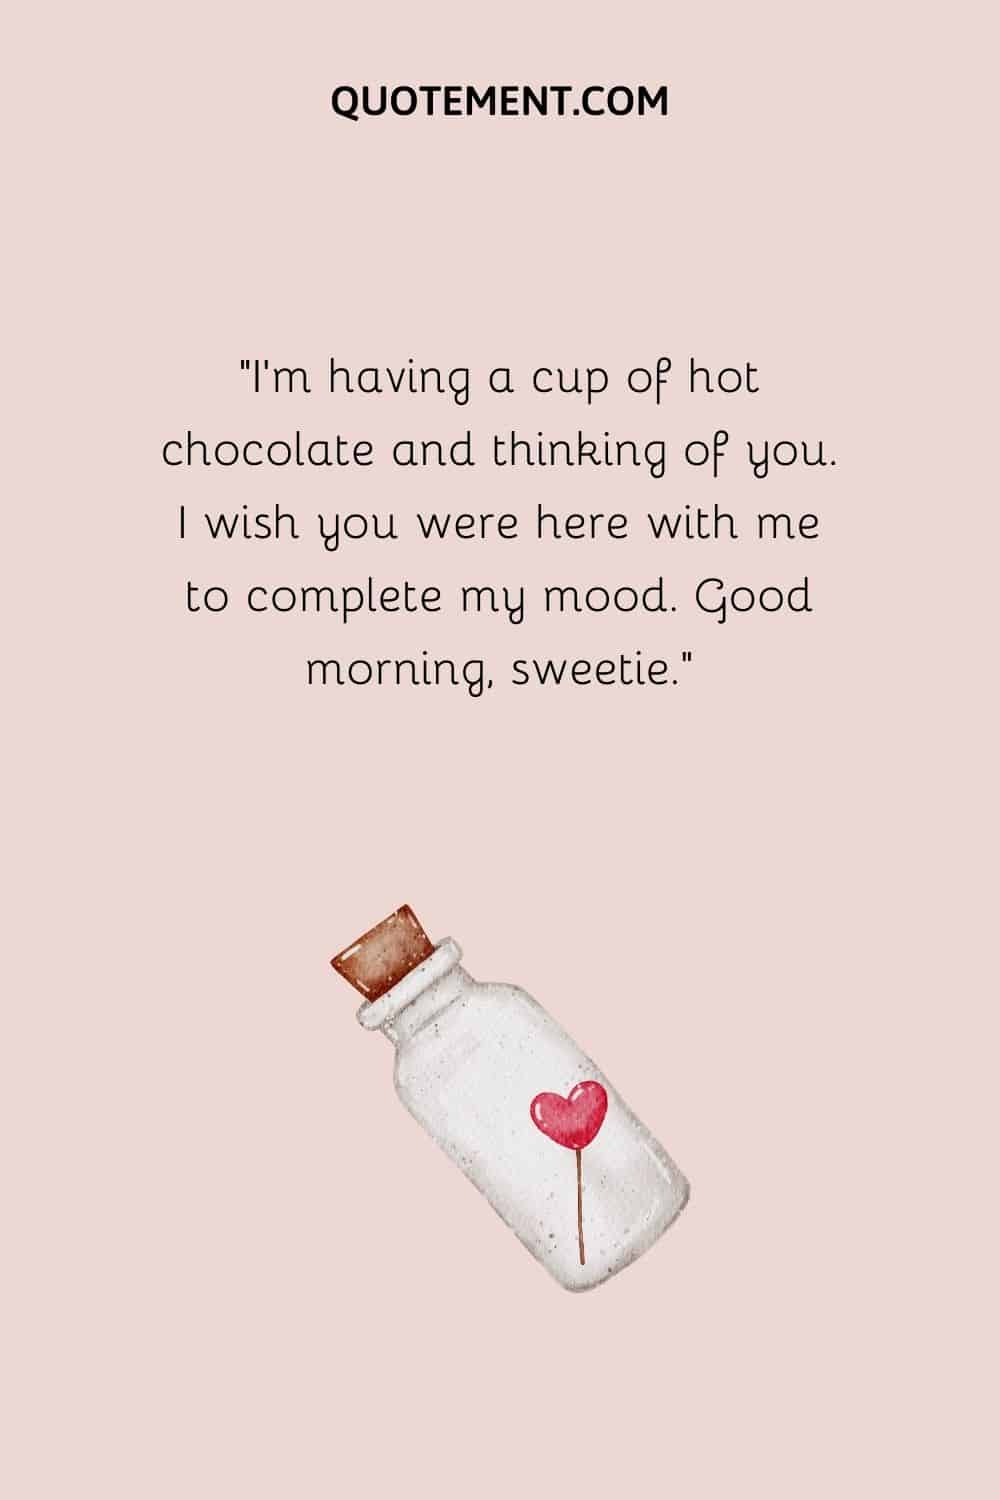 “I’m having a cup of hot chocolate and thinking of you. I wish you were here with me to complete my mood. Good morning, sweetie.”